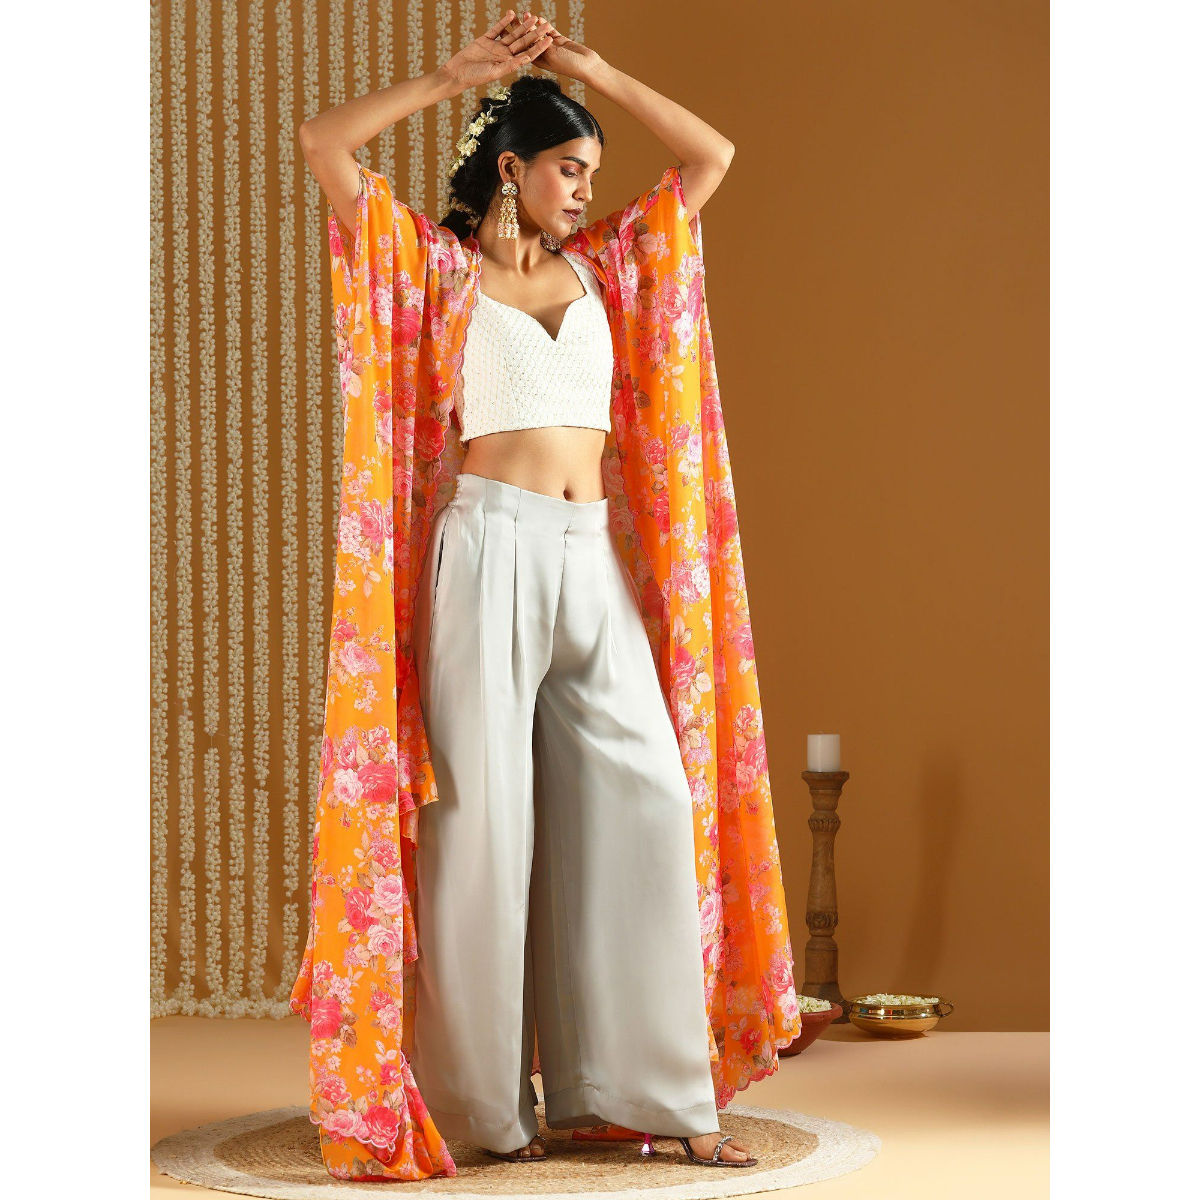 Discover more than 156 white palazzo pants with top